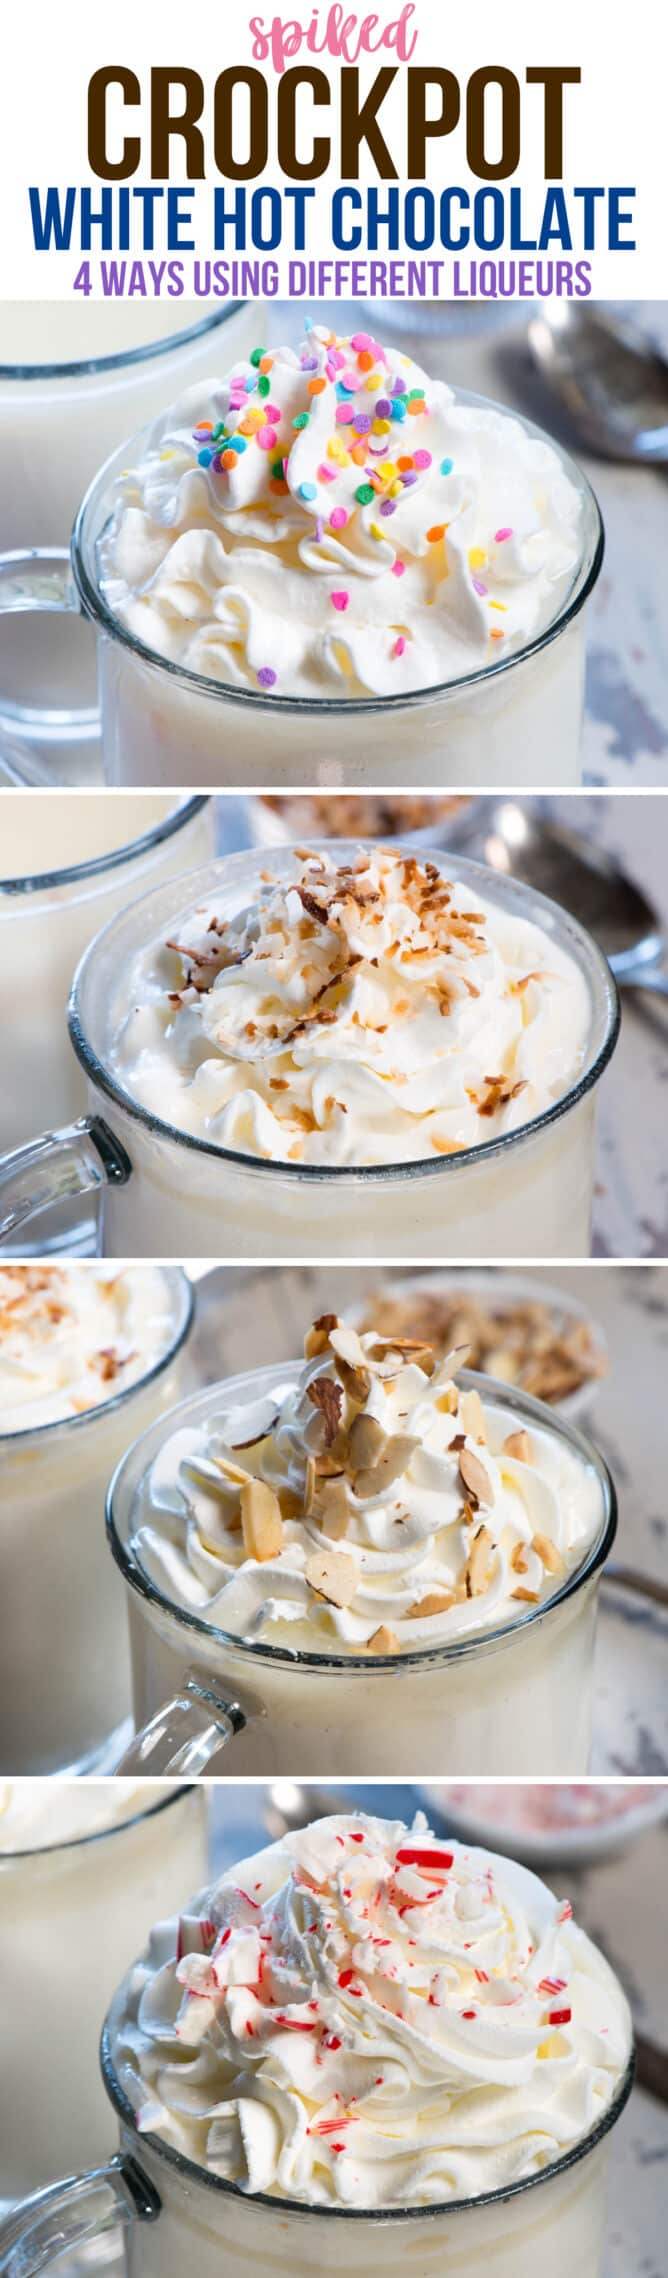 Spiked Crockpot White Hot Chocolate is made in the slow cooker with white chocolate, milk, and coffee creamer. Then it's SPIKED to make the perfect winter cocktail recipe. Birthday cake, amaretto, peppermint, rum, and more ideas for flavors!